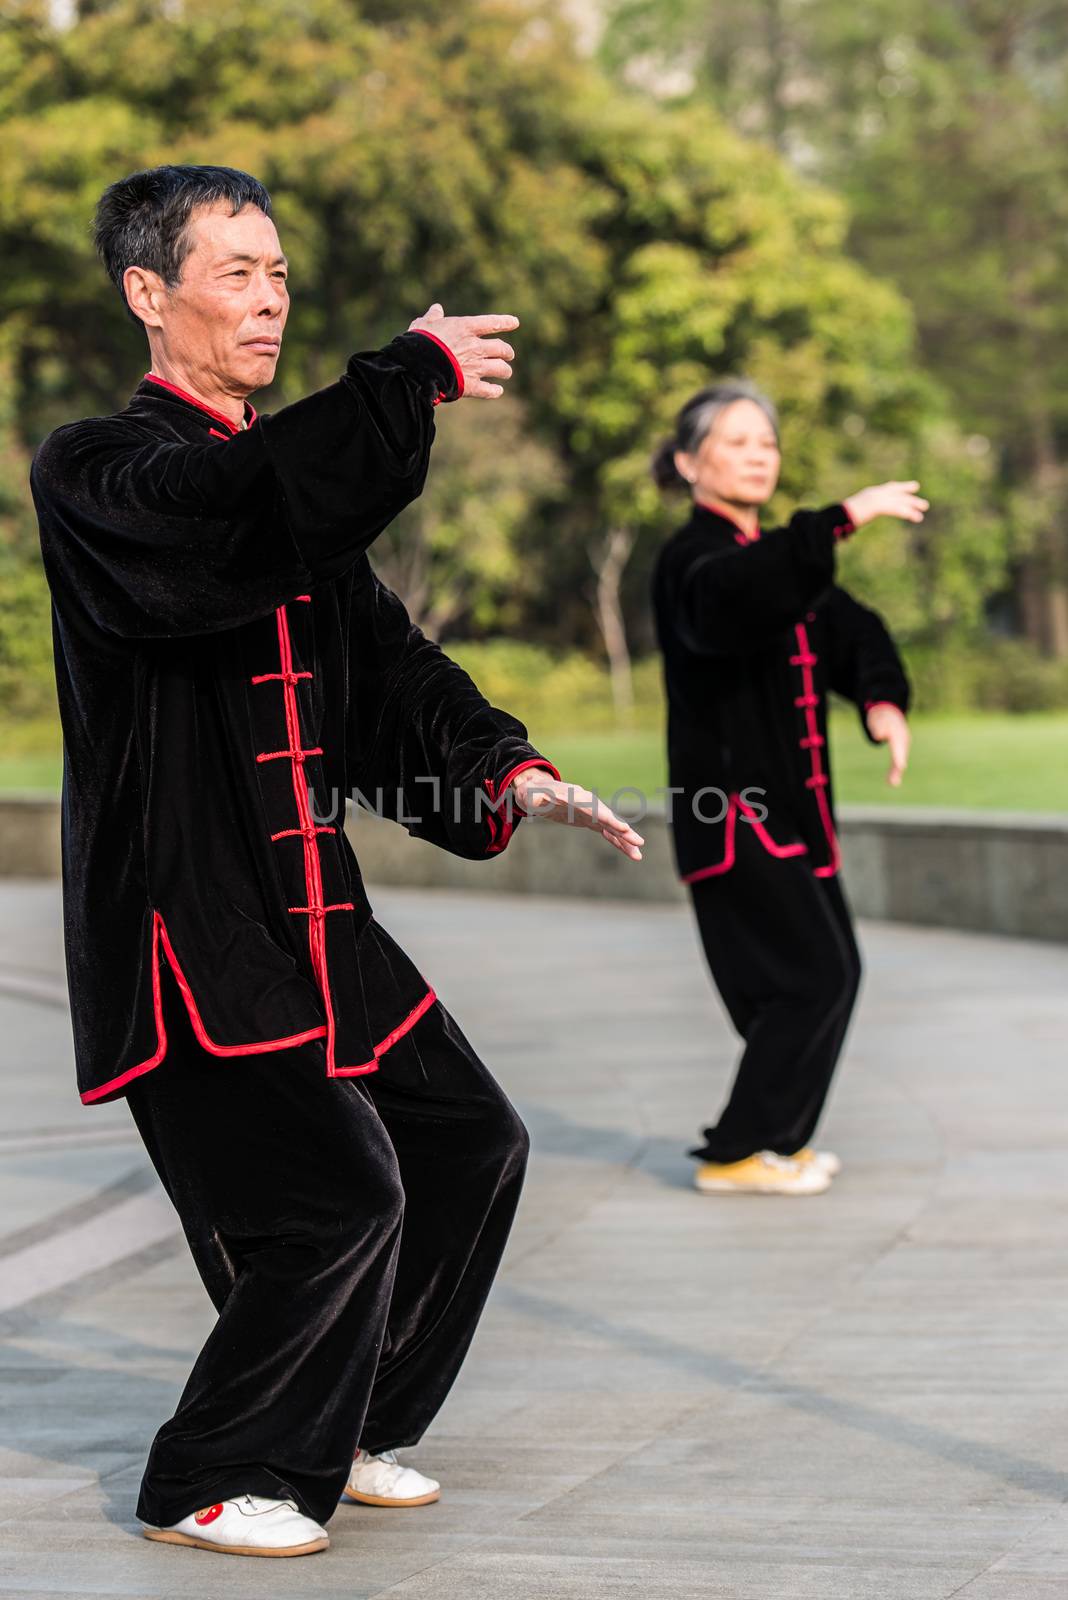 Shanghai, China - April 7, 2013: people exercising tai chi with traditional costume in gucheng park in the city of Shanghai in China on april 7th, 2013